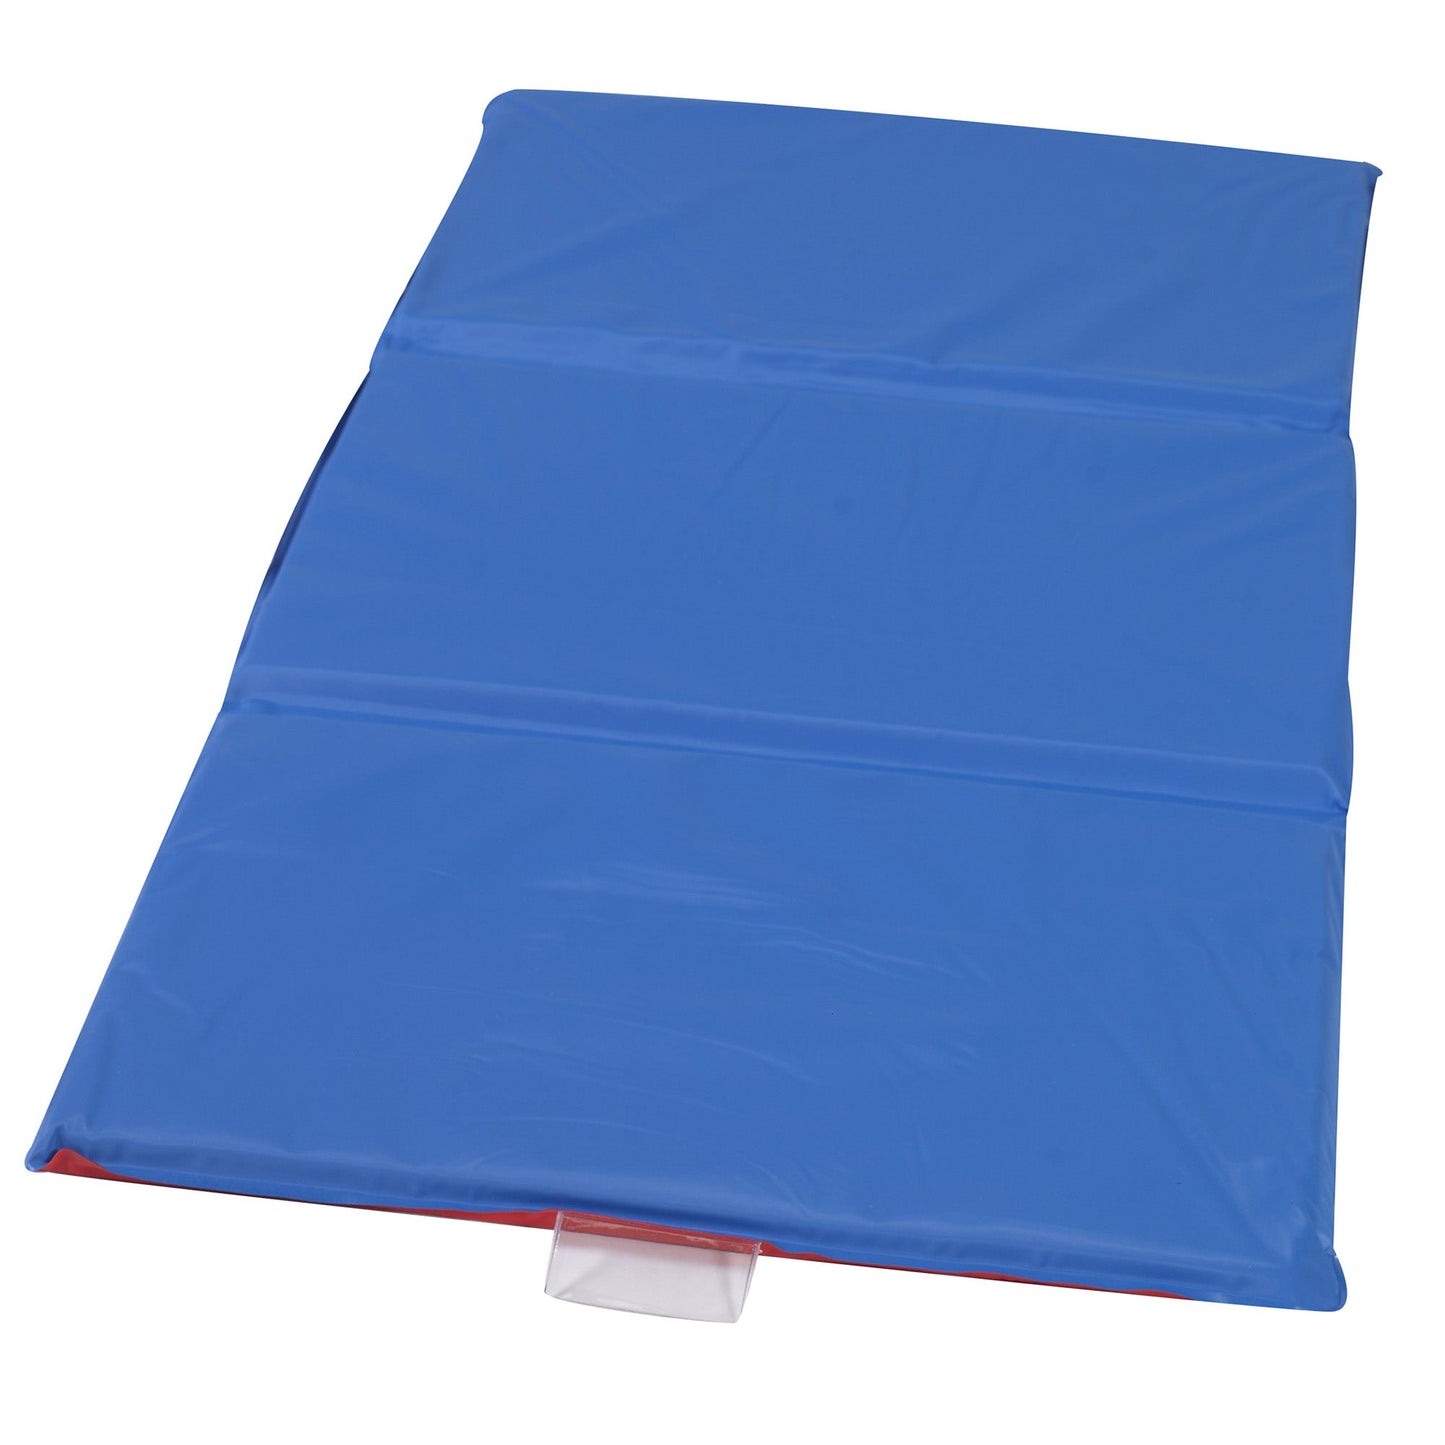 Children's Factory 1" Infection Control 3 Section Folding Rest Mat - Set of 10 - Red/Blue (CF400-524RB) - SchoolOutlet